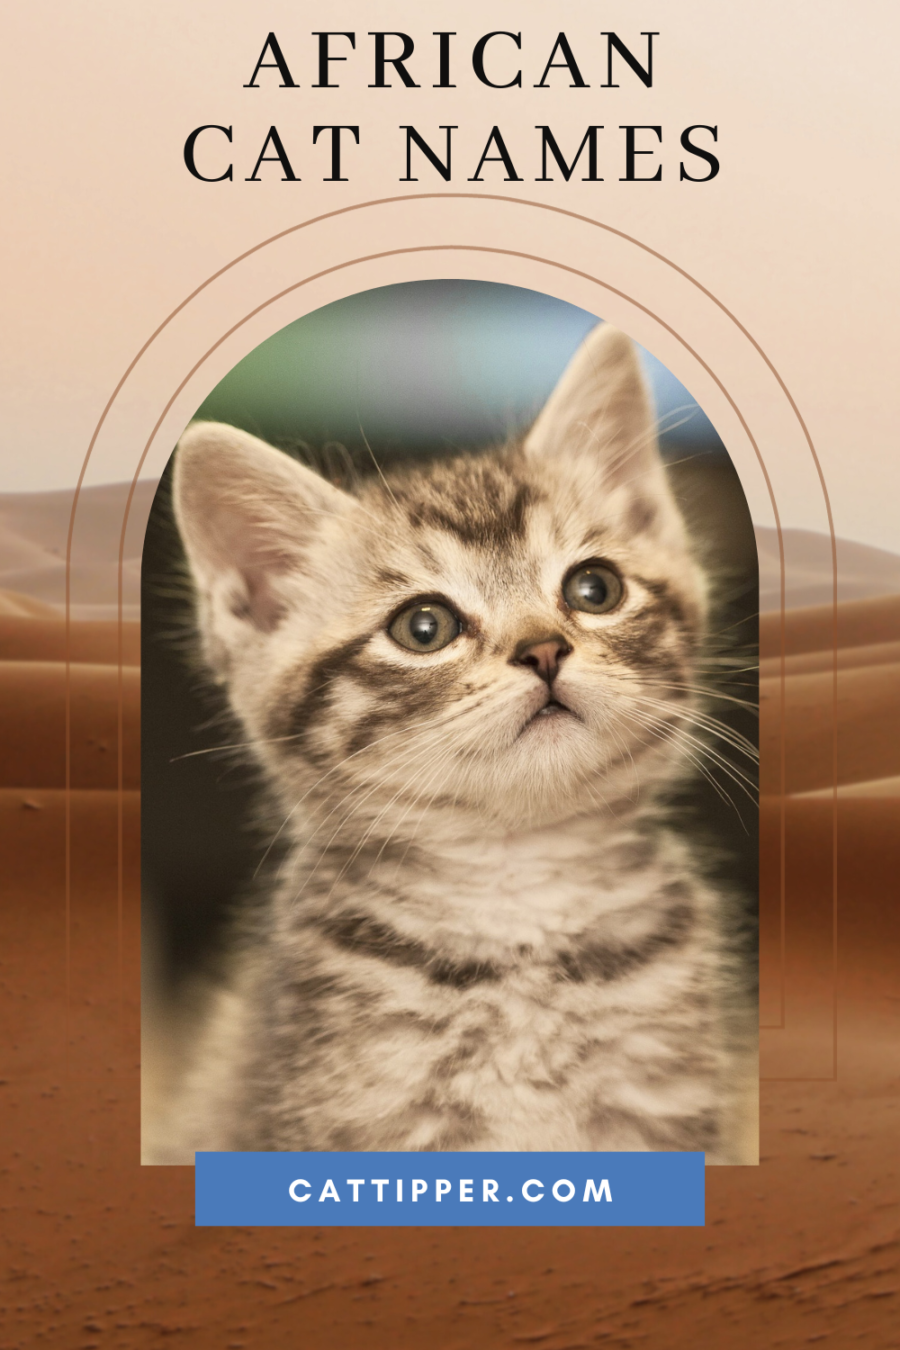 Kitten photo with background image of African desert and words African Cat Names at top of image